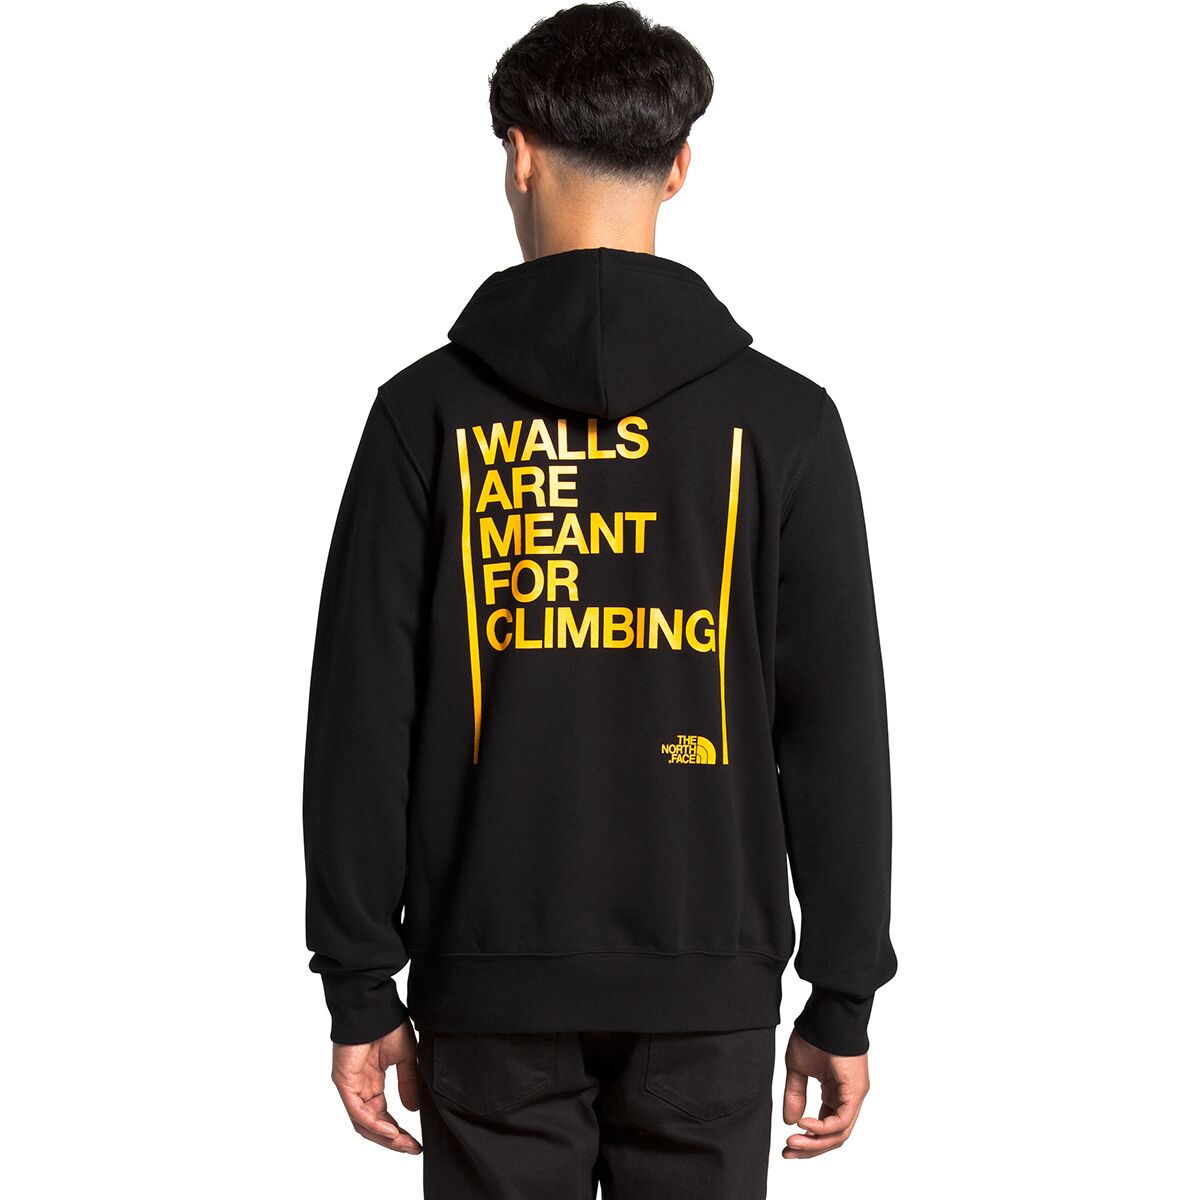 walls are meant for climbing tee